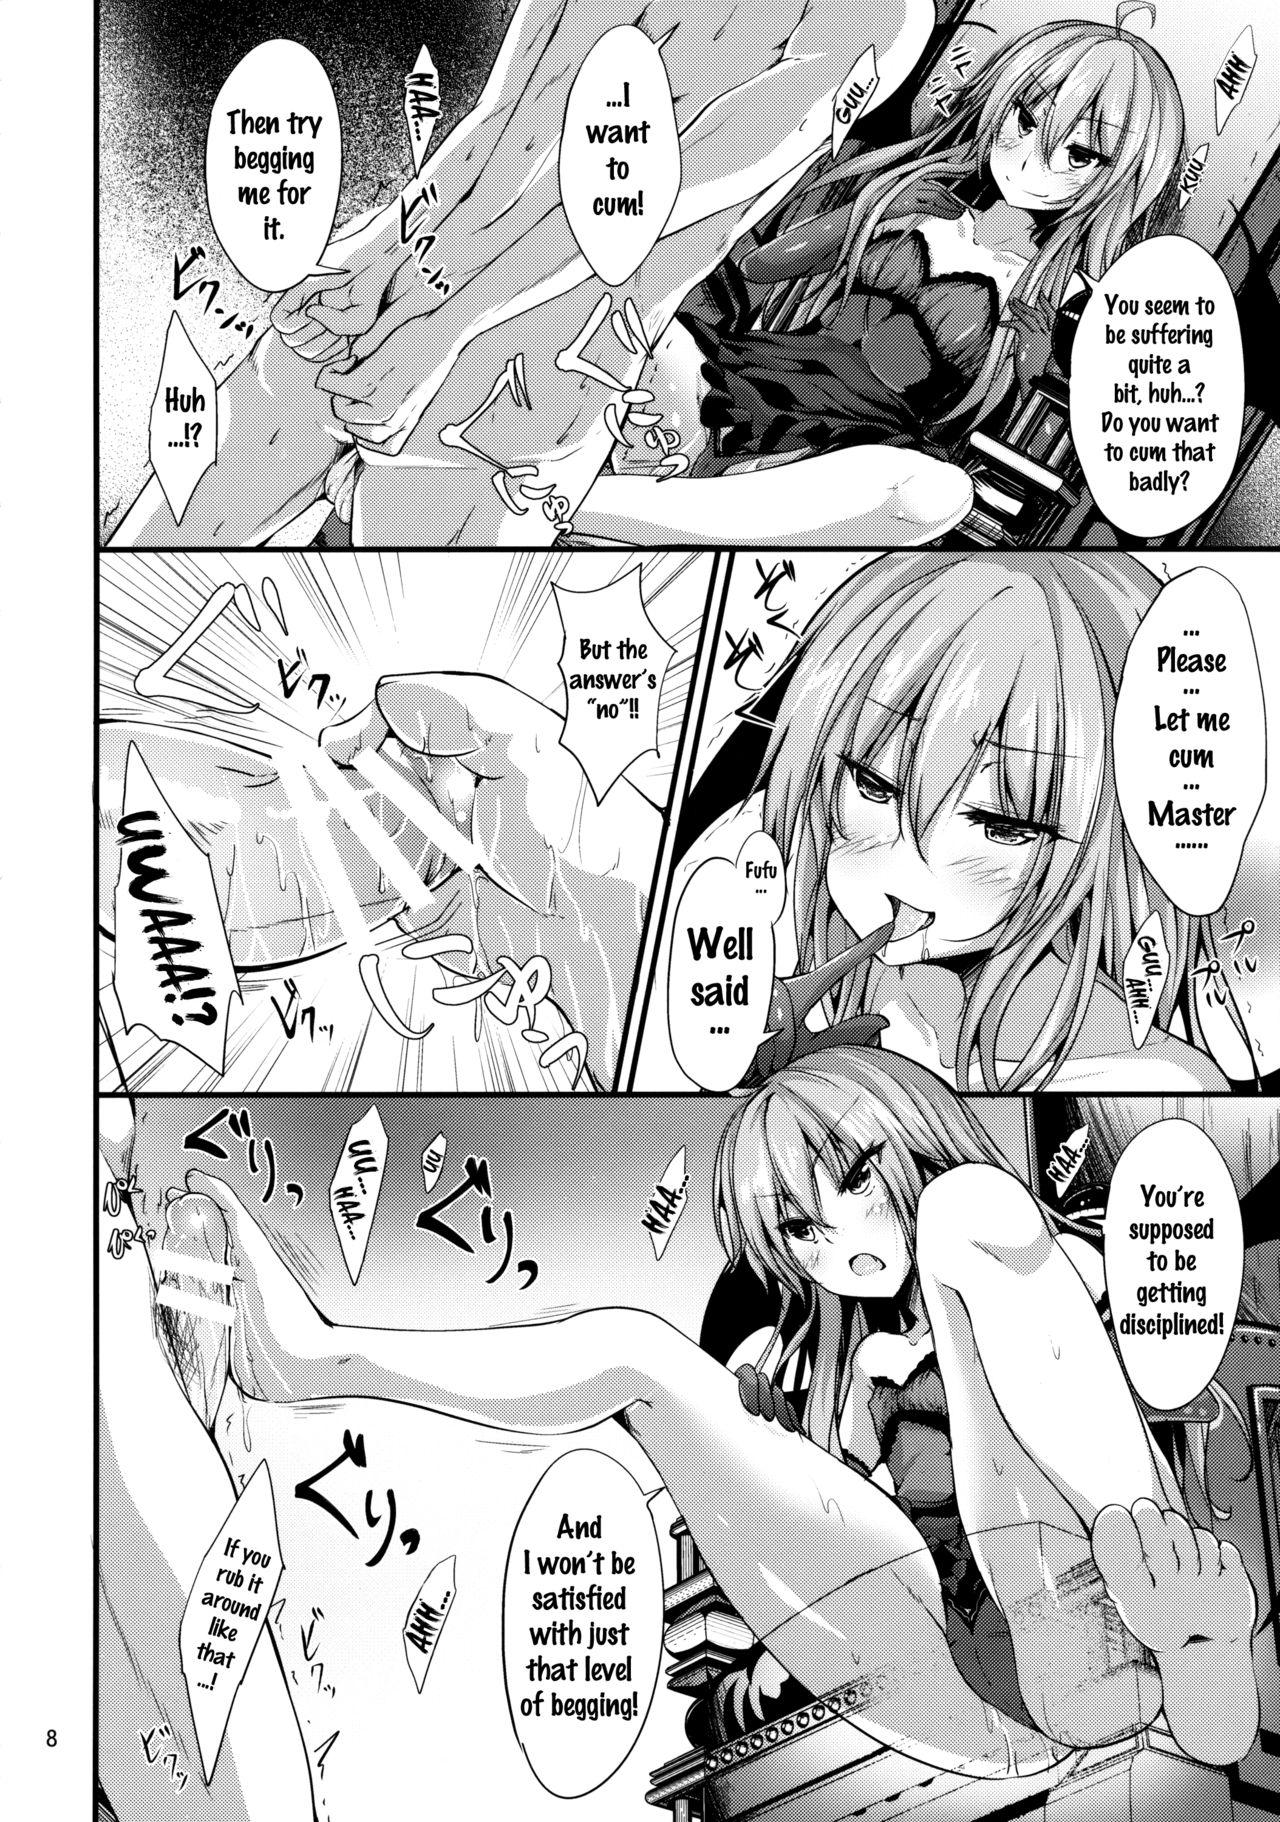 Ghetto Remi no Motto Otona ni Narumon! | Remi's Becoming More of An Adult! - Touhou project Gonzo - Page 7